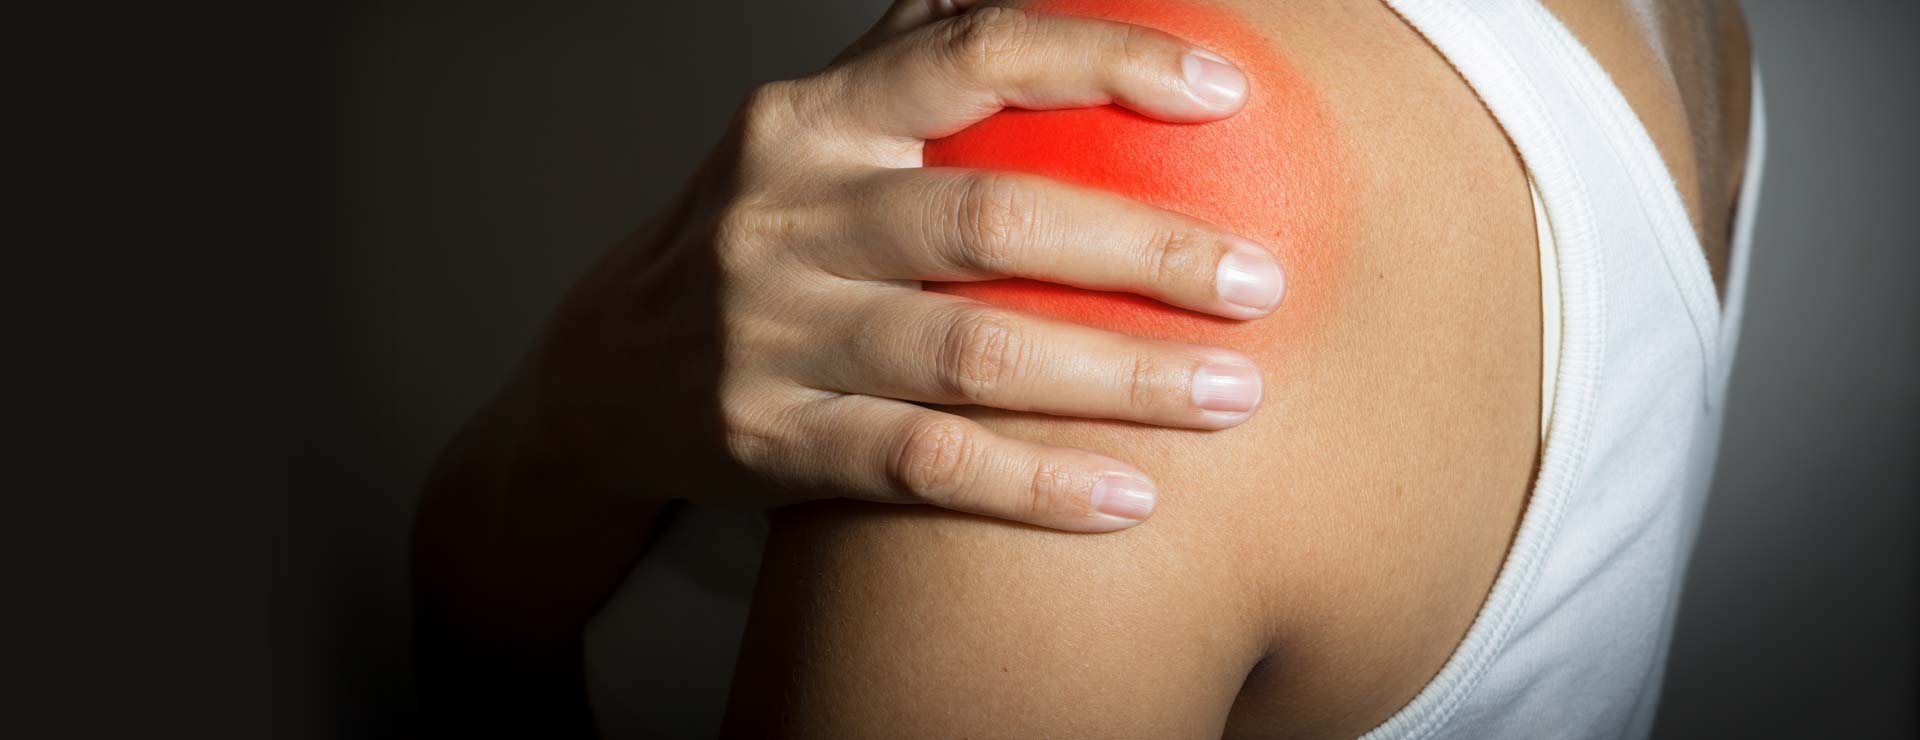 Top Causes Of Shoulder Pain And How To Prevent It United Hospital